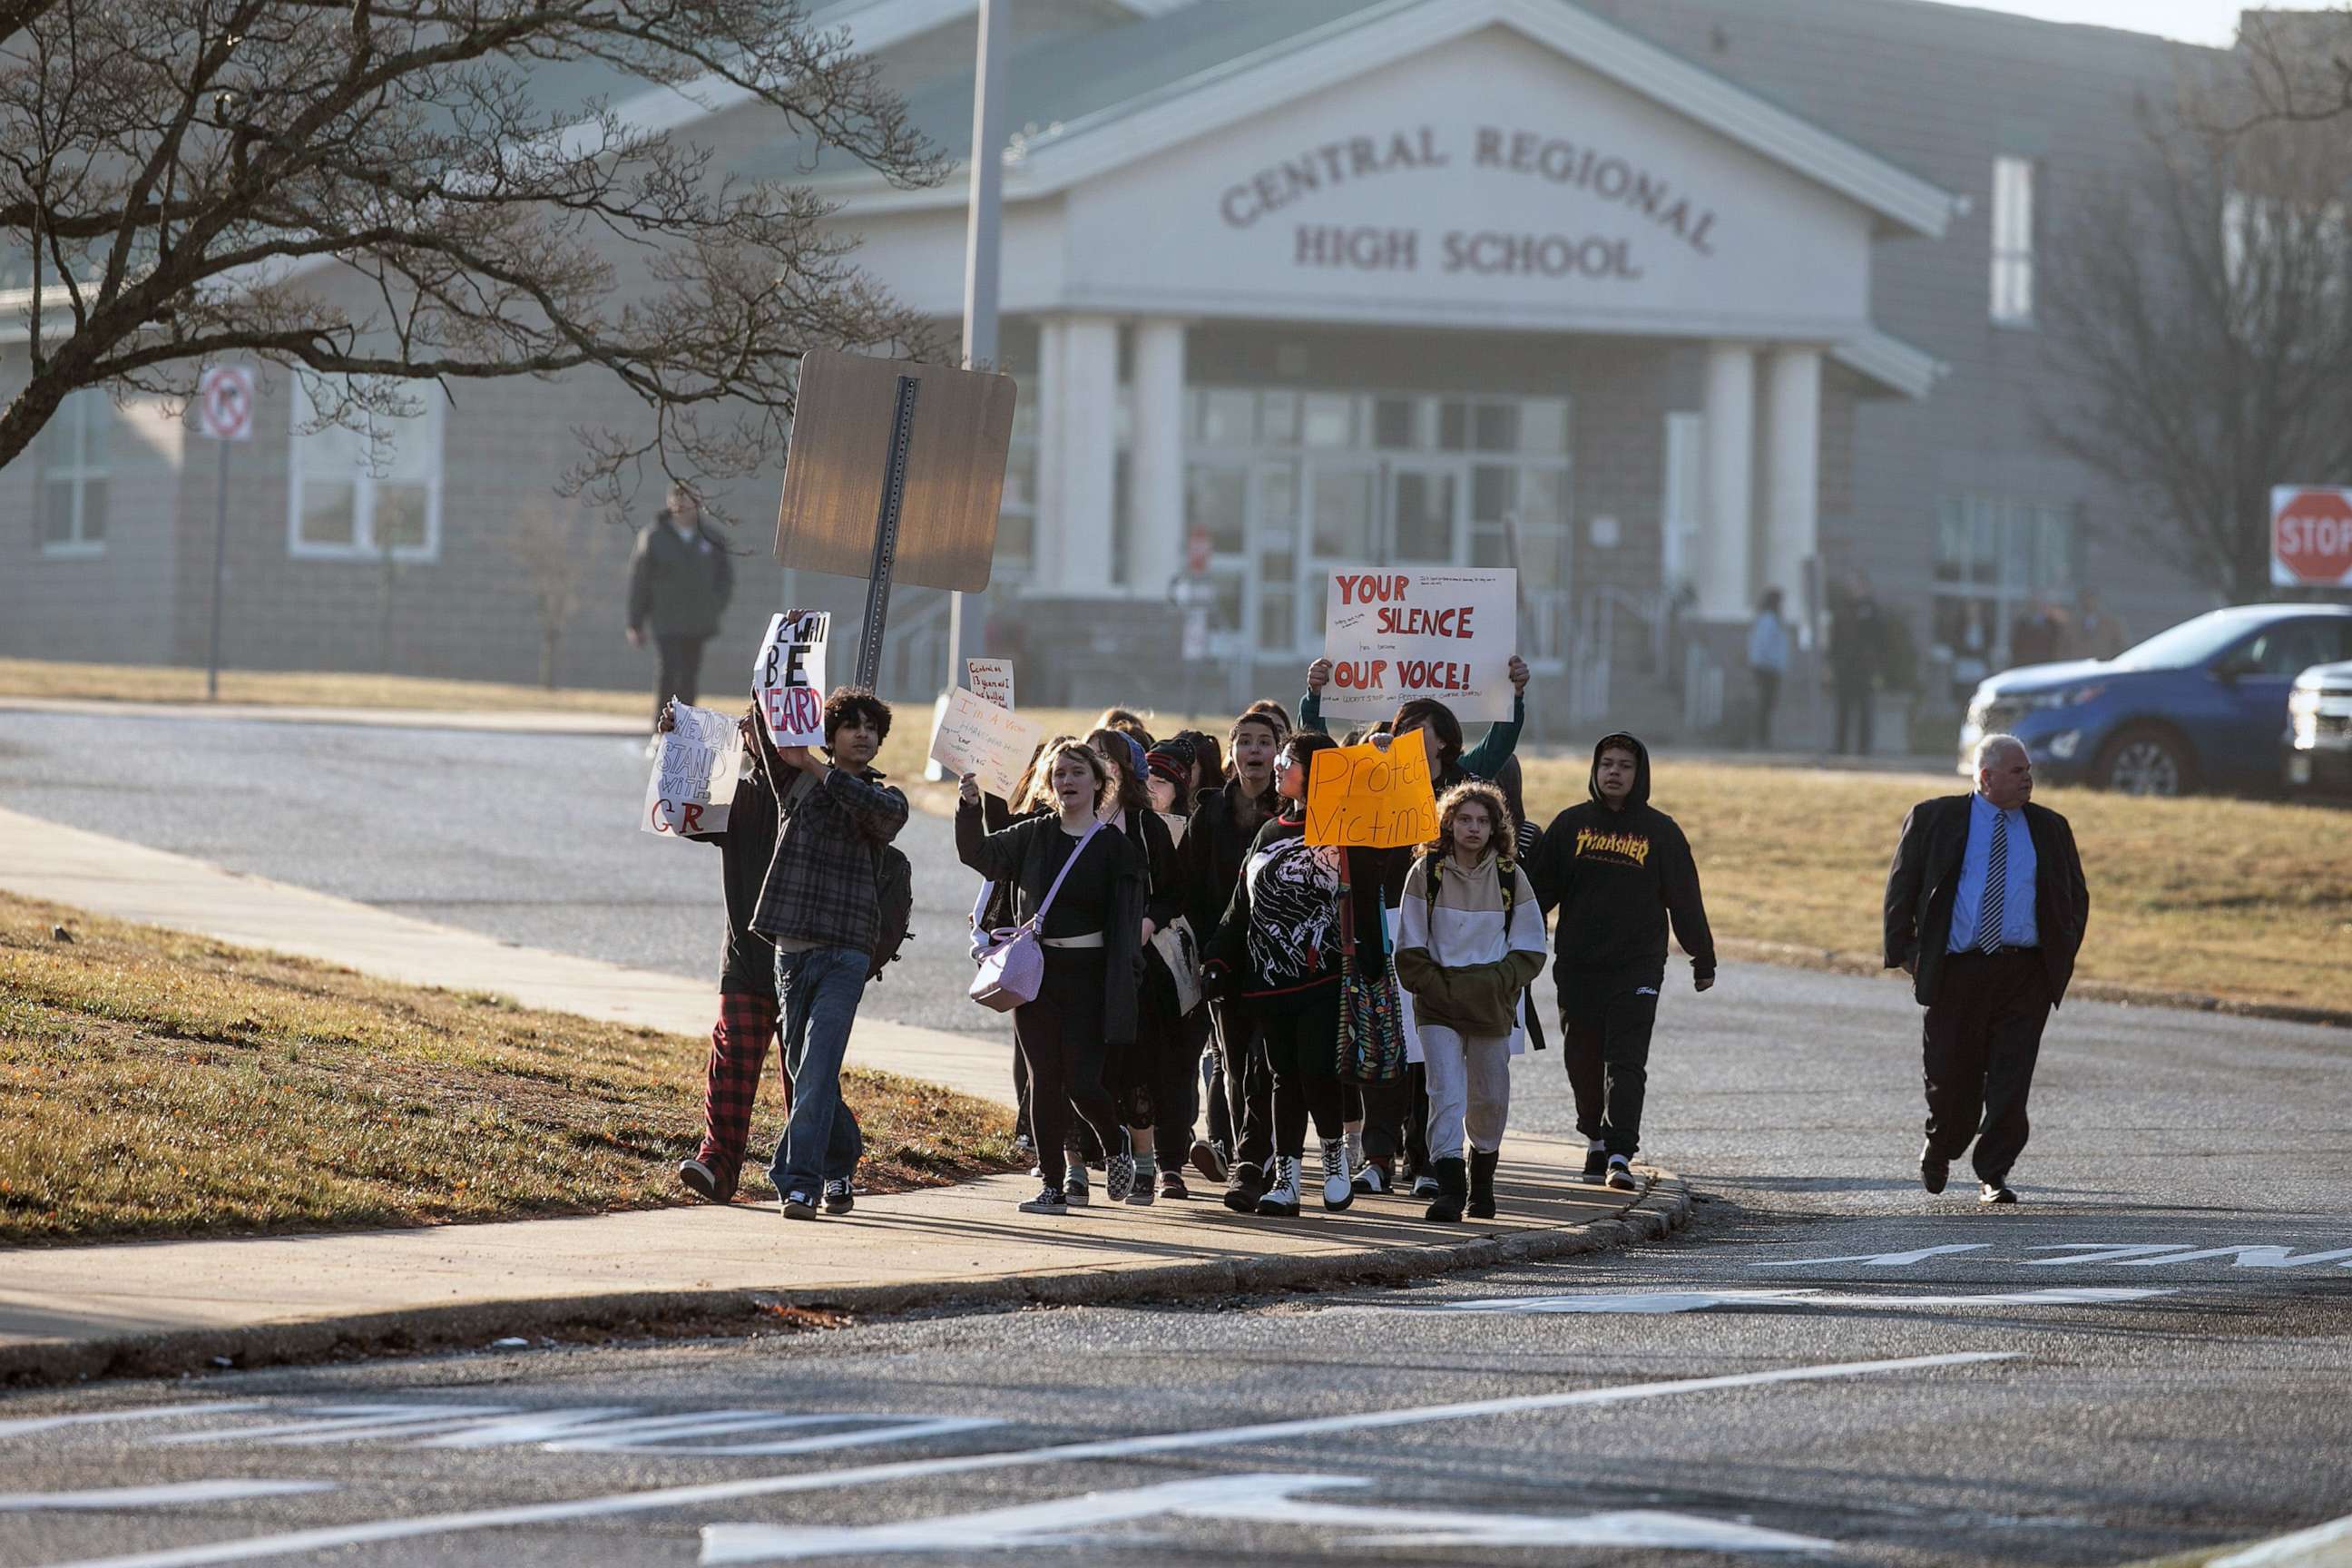 PHOTO: Students of Central Regional High School protest along Forest Hills Parkway in Berkeley Township, N.J., Feb. 8, 2023.